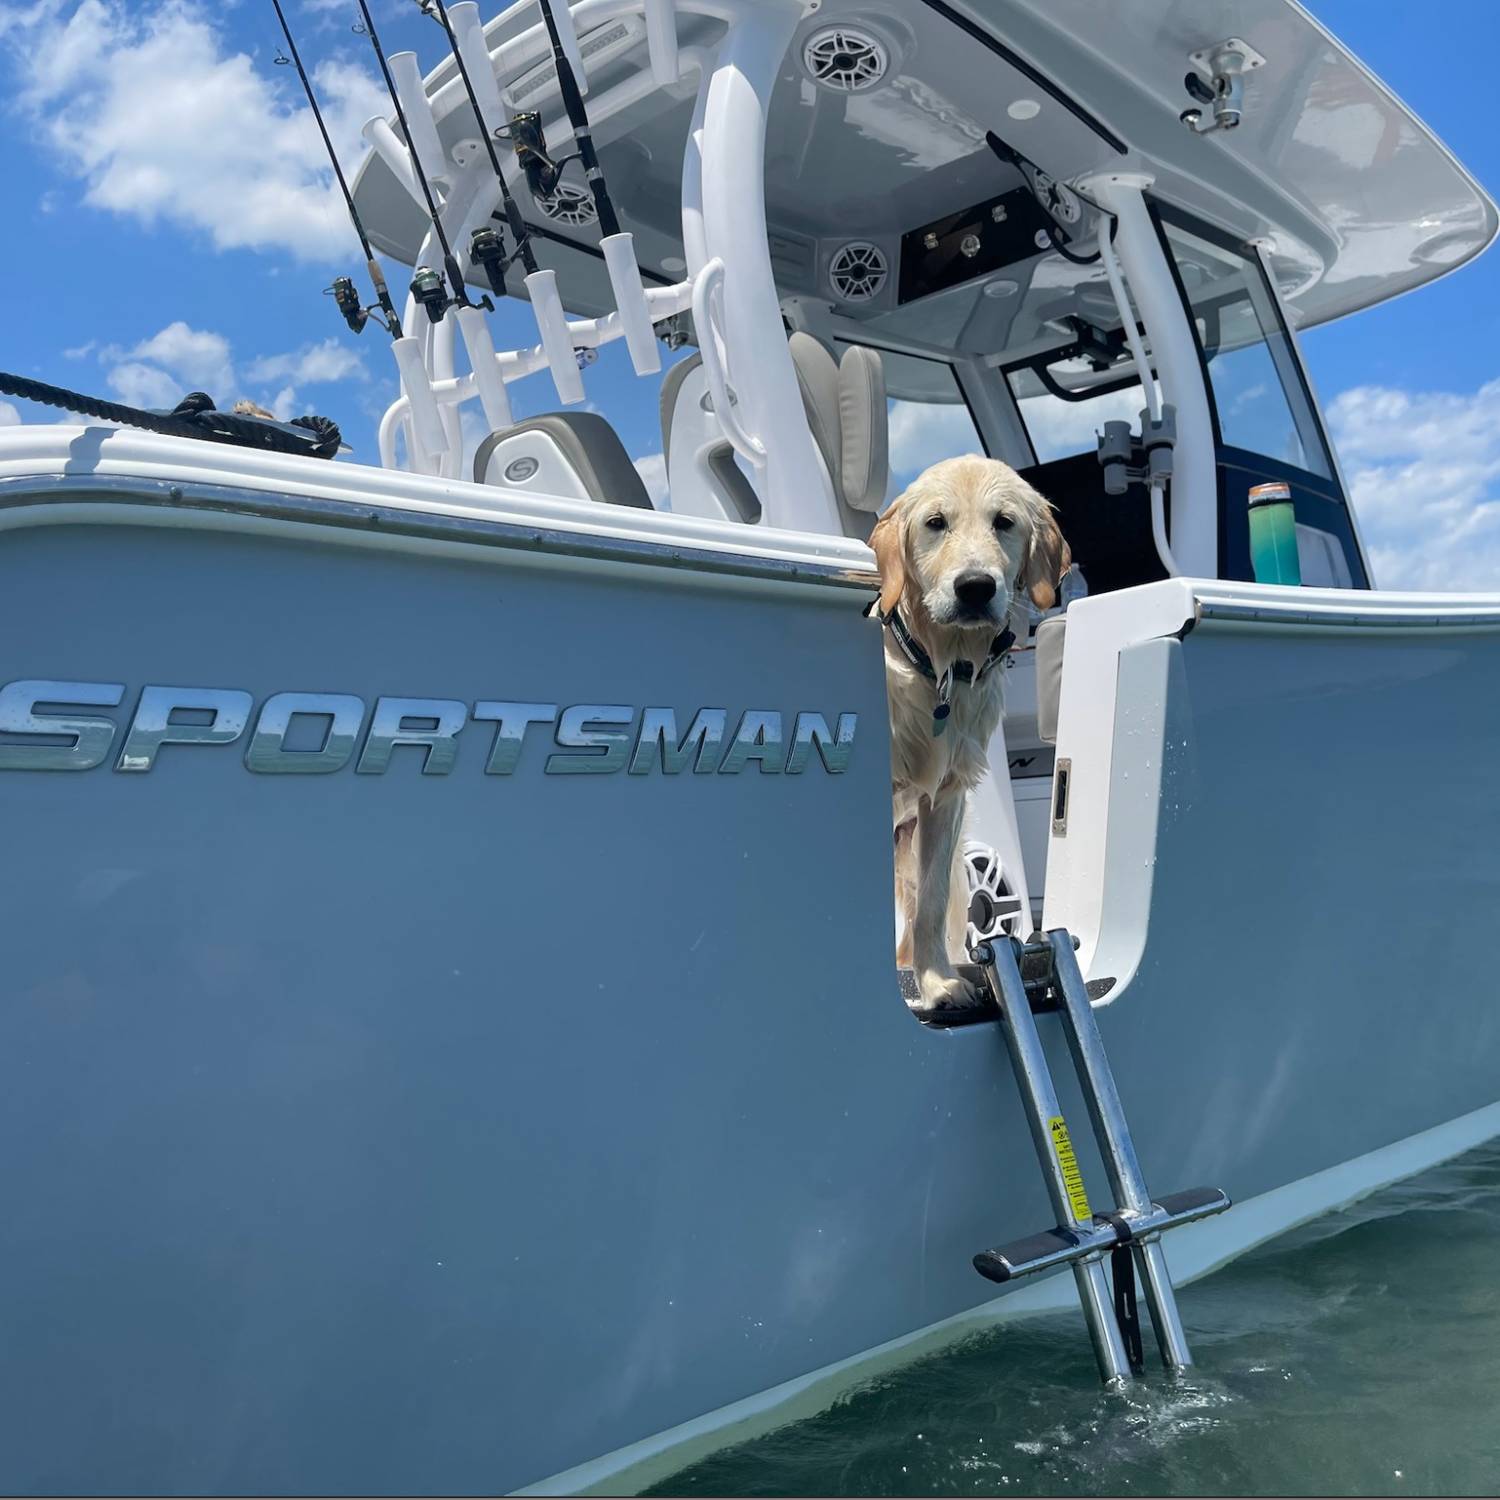 Title: Beaufort on the Bay - On board their Sportsman Open 302 Center Console - Location: Cape Lookout, NC. Participating in the Photo Contest #SportsmanJuly